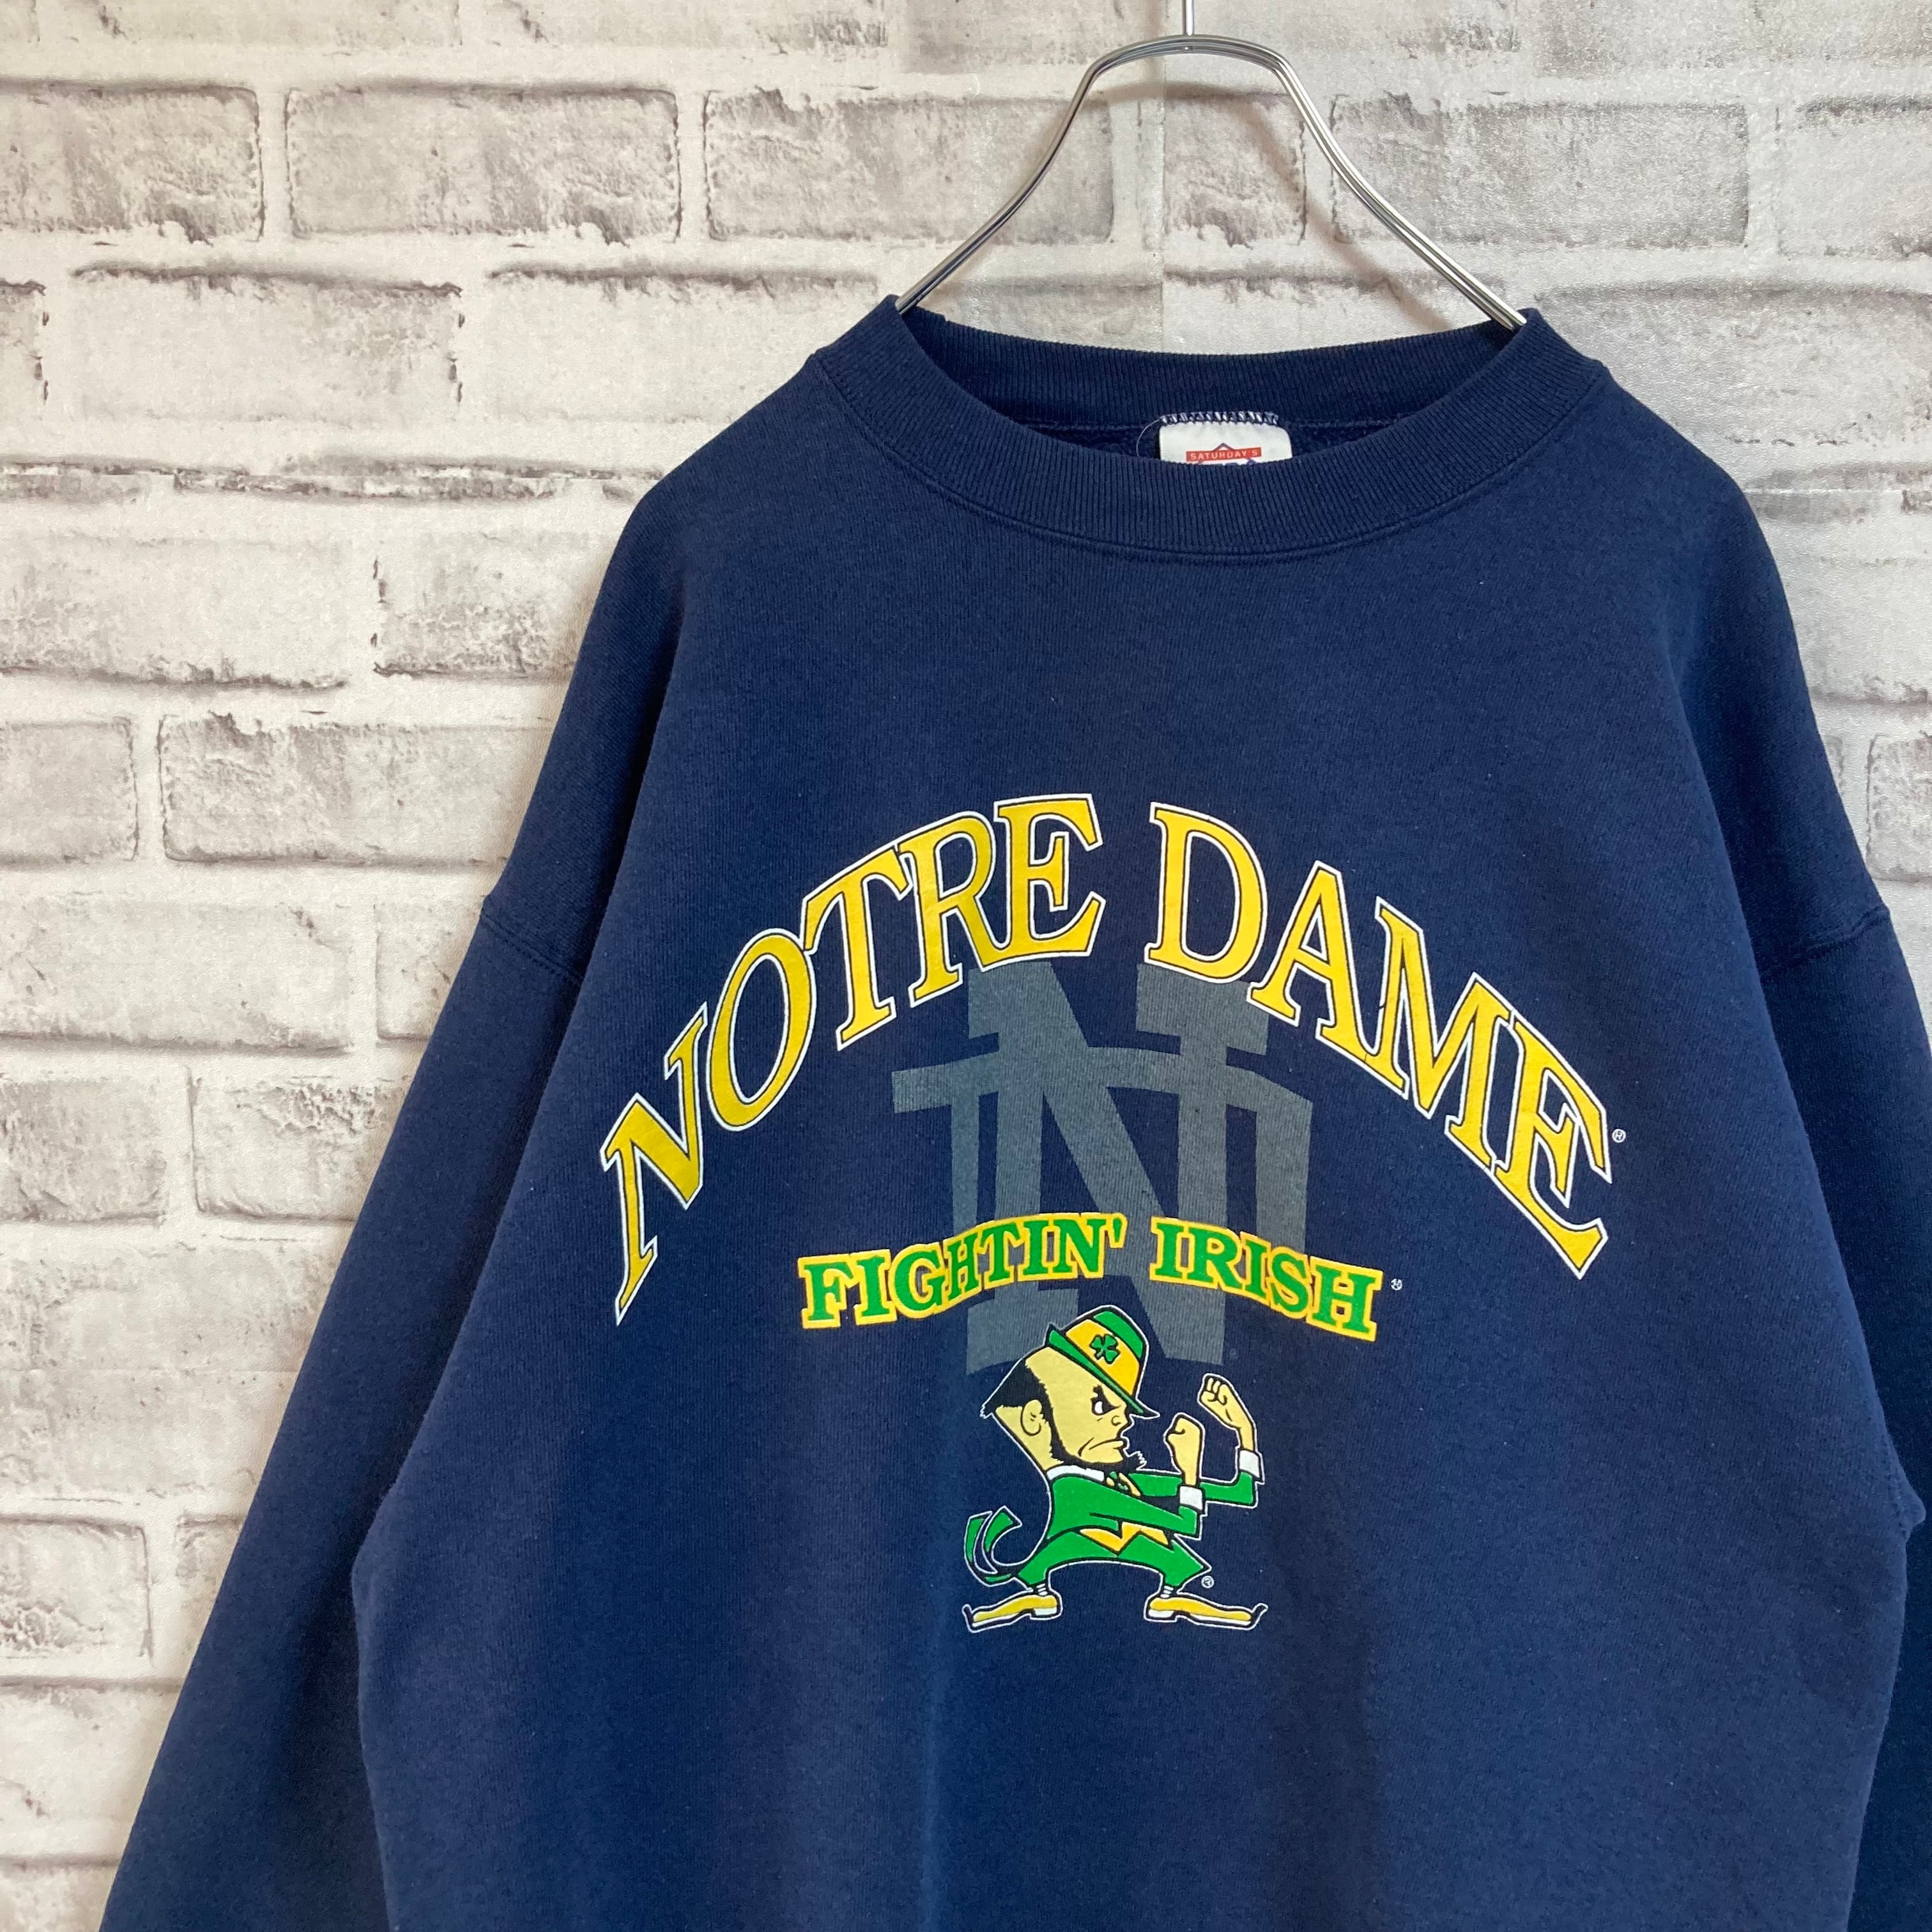 SATURDAY'S HEROL/S Sweat L Made in USA s “NOTRE DAME